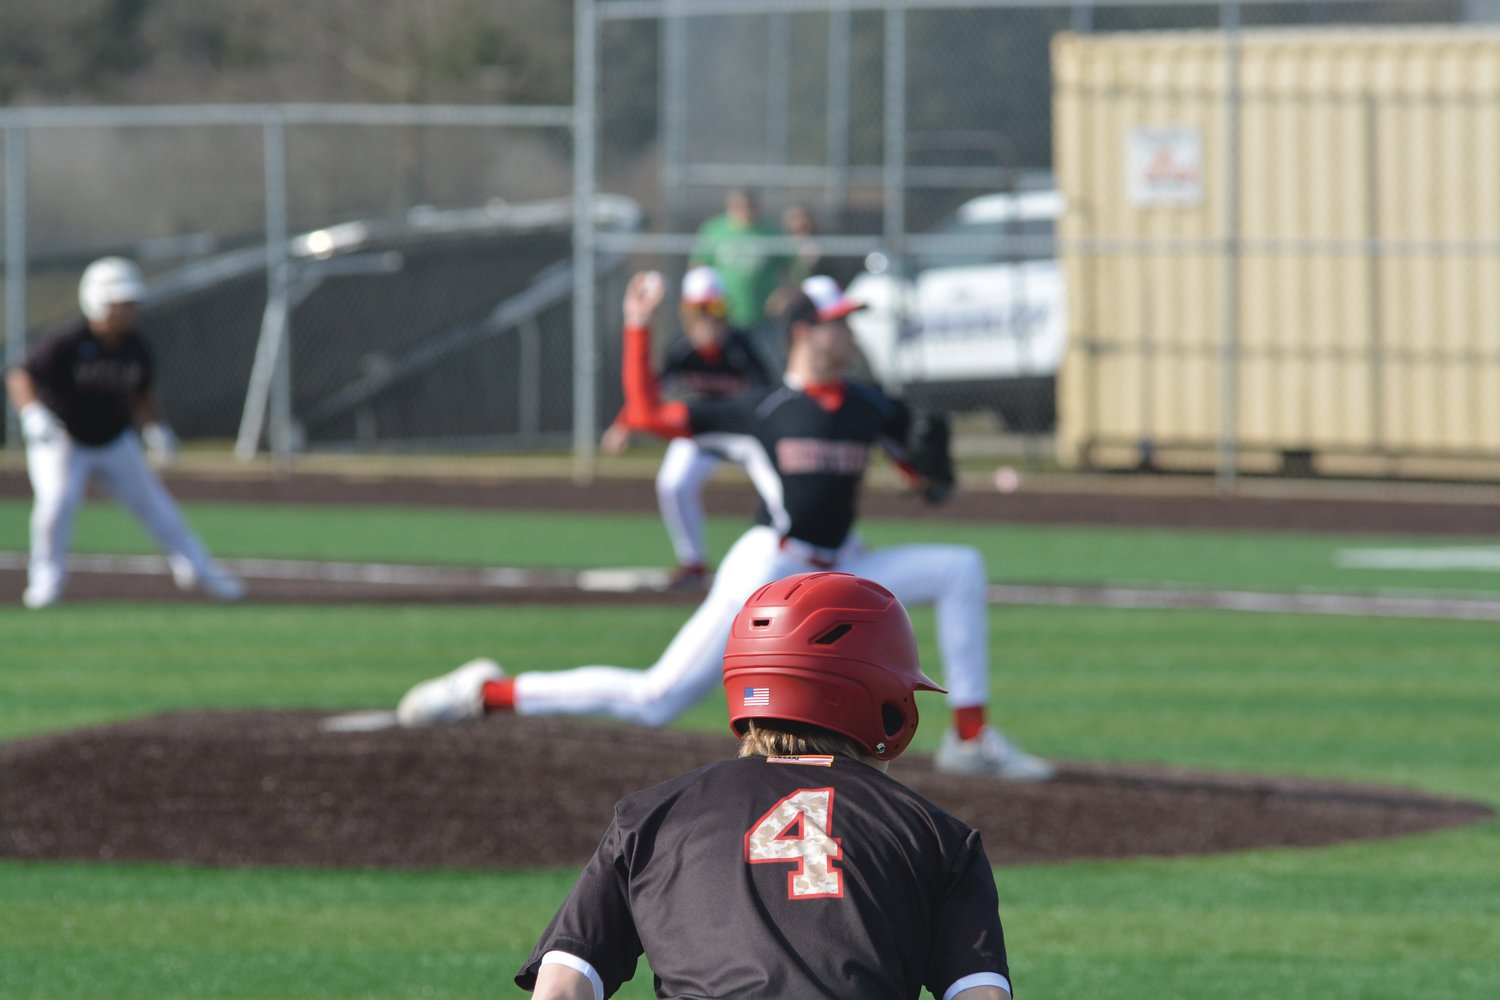 Senior Tornado Aden Schaler looks to home plate as Steilacoom delivers a pitch on Friday, March 17.